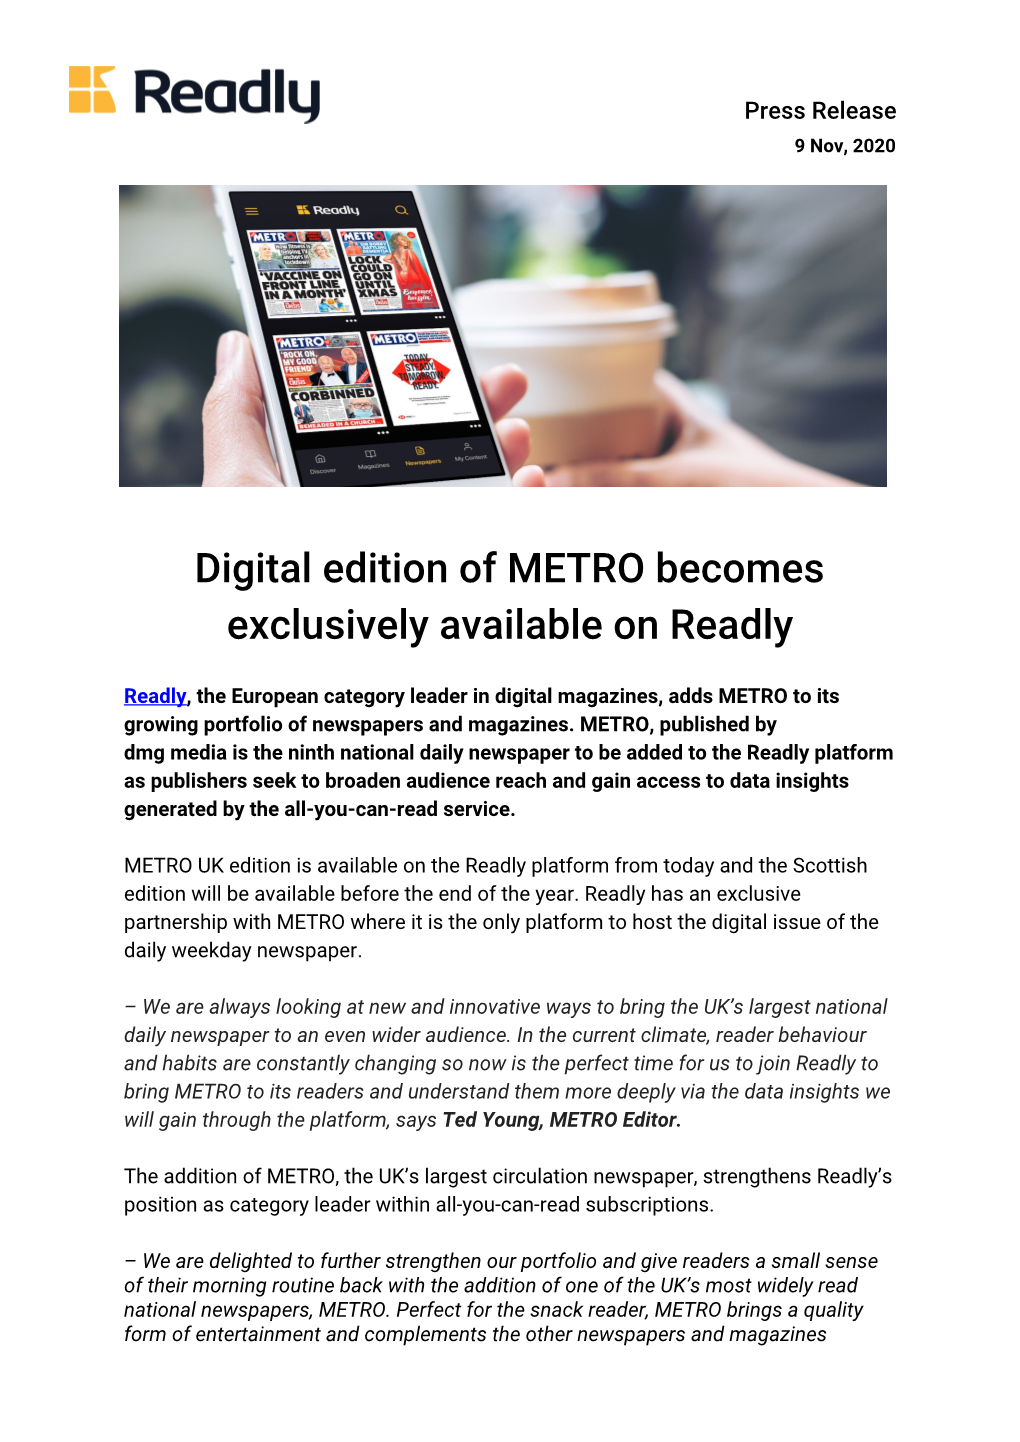 Digital Edition of METRO Becomes Exclusively Available on Readly